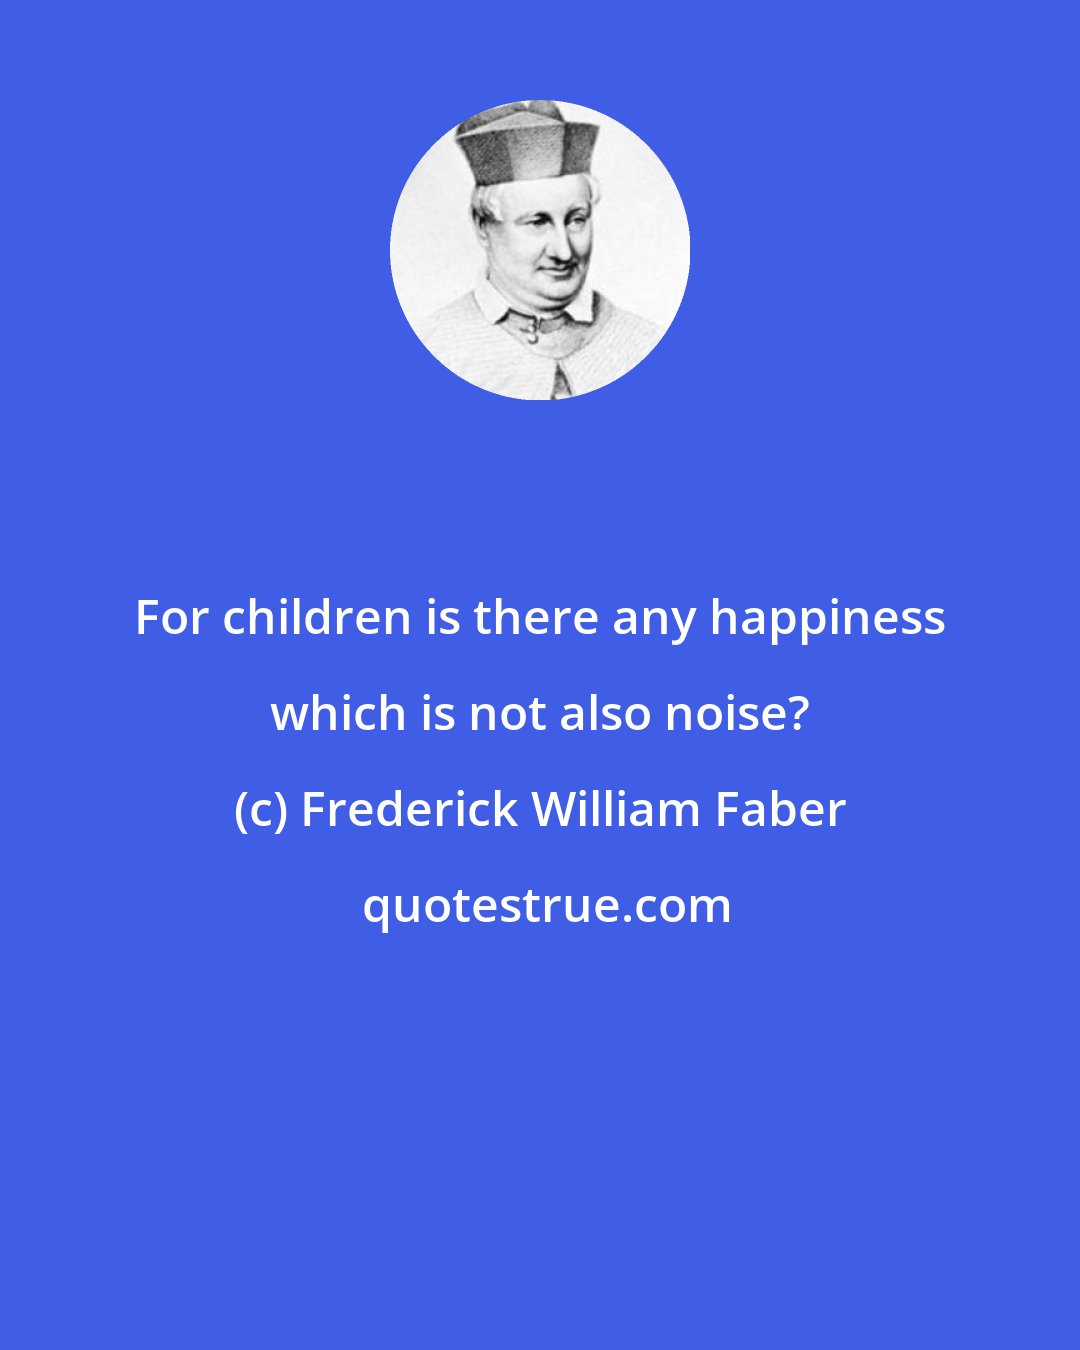 Frederick William Faber: For children is there any happiness which is not also noise?